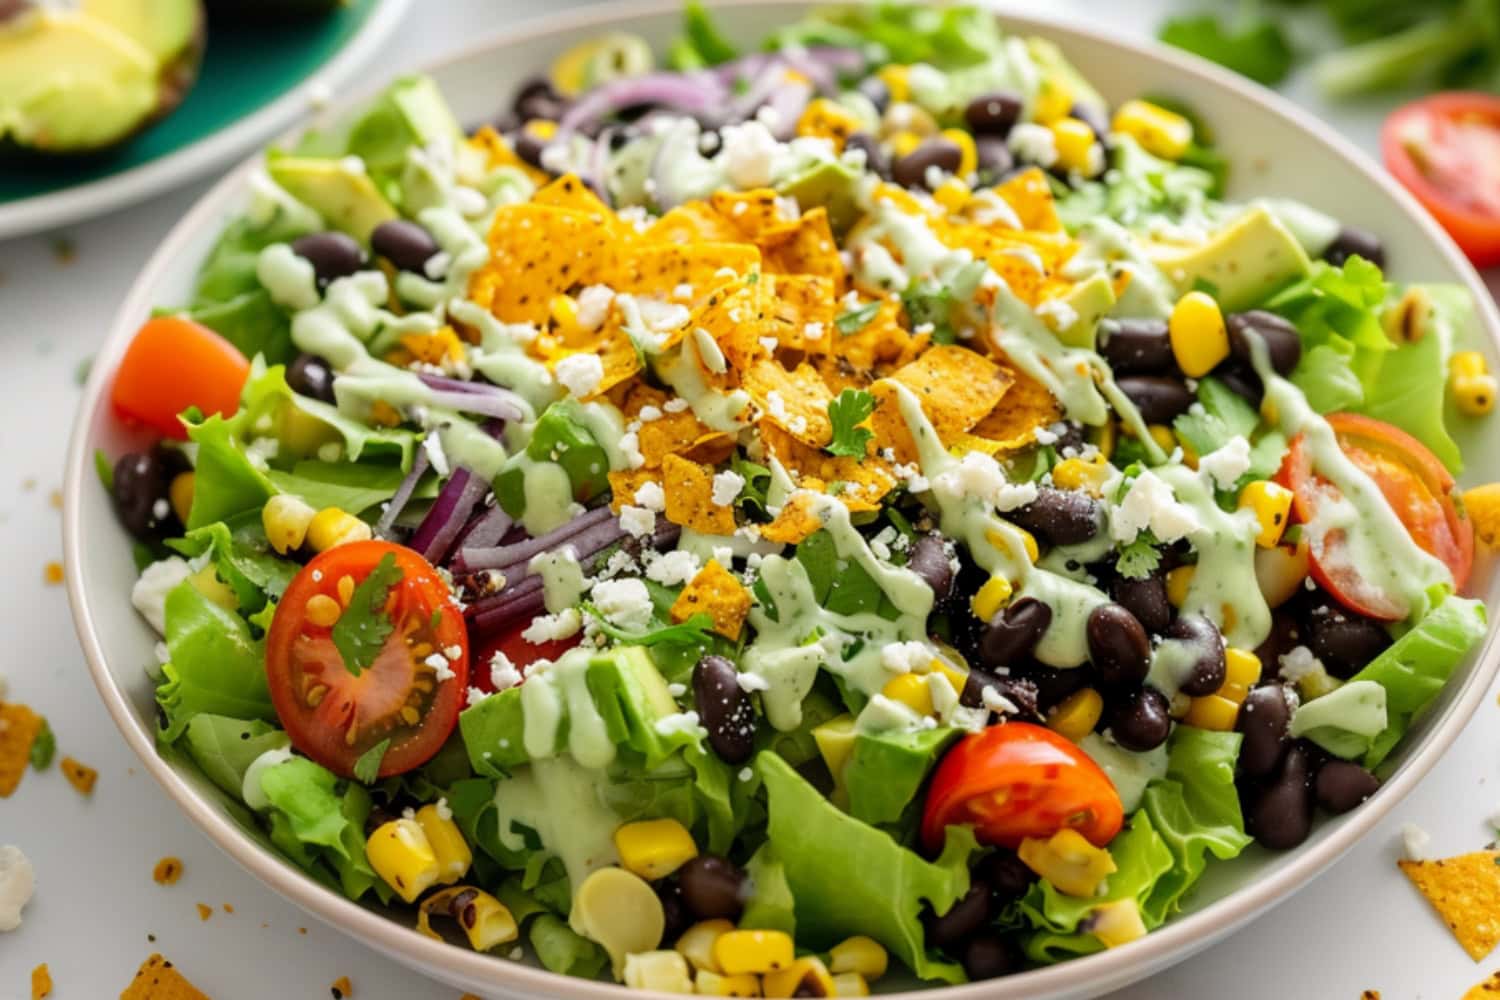 Southwestern salad made with Romaine, hearty black beans, sweet corn, crunchy veggies, salty cotija, and creamy avocado and avocado dressing garnished with chopped tortilla on top.